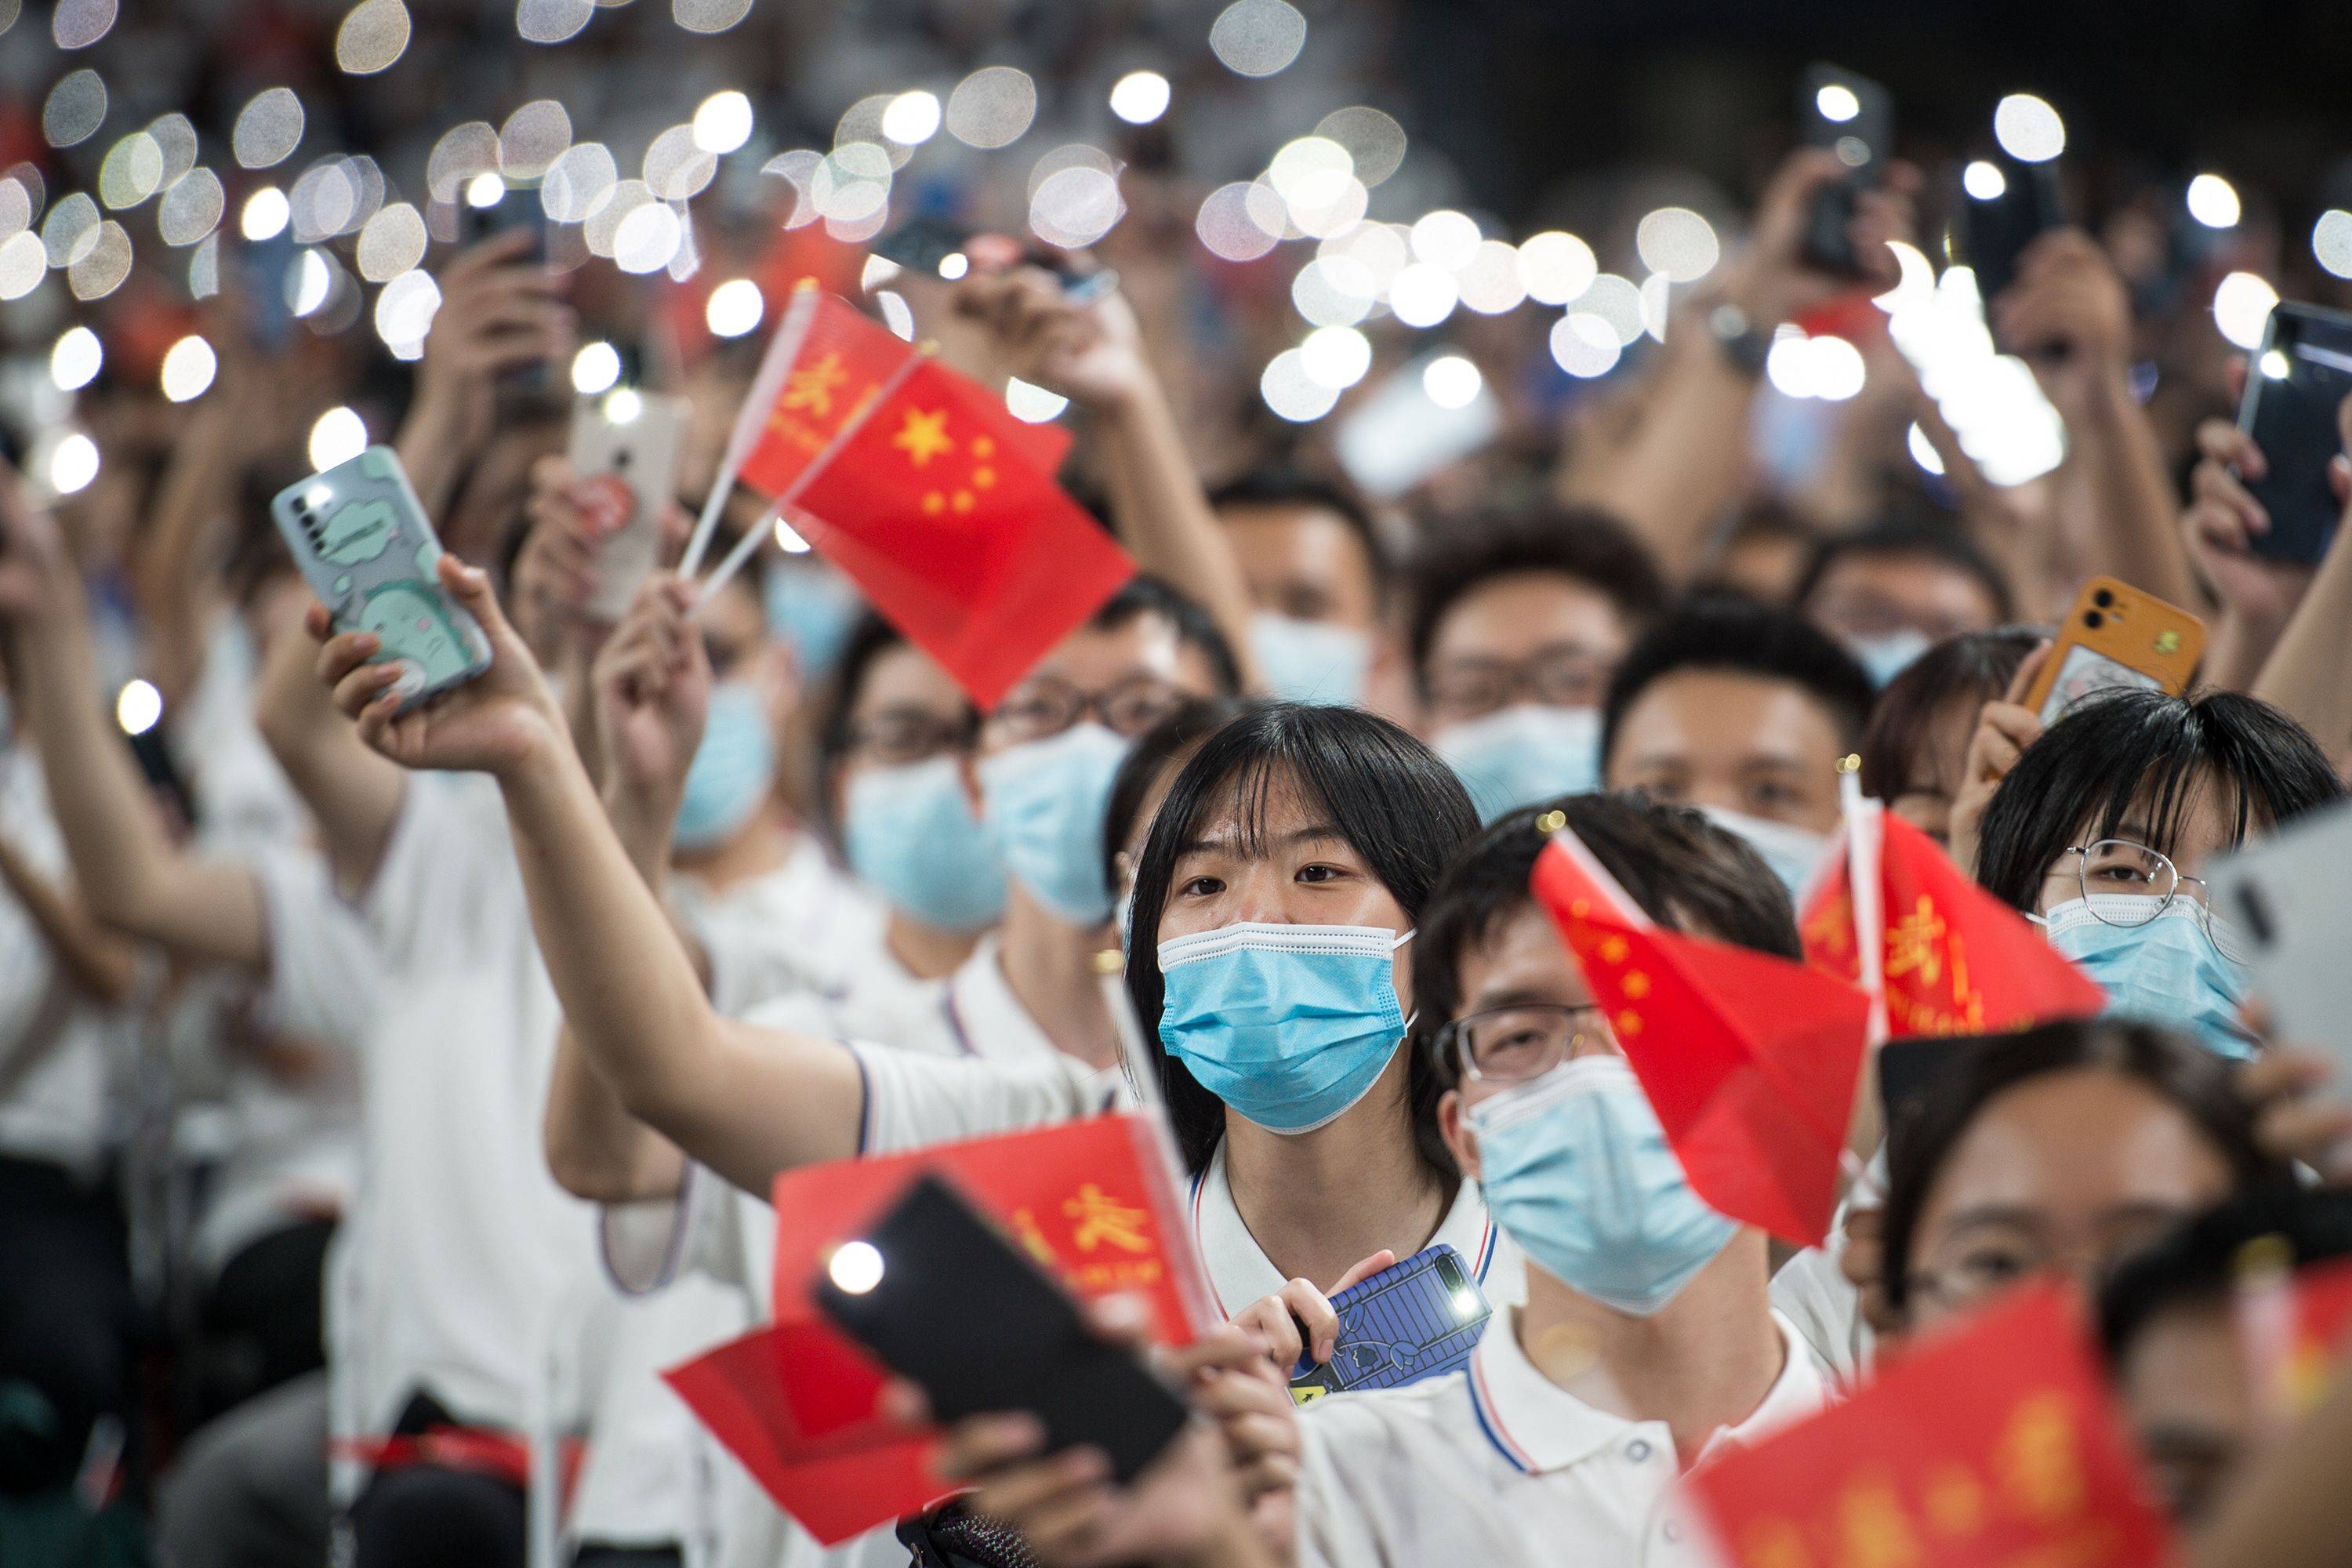 First-year students attend a commencement ceremony at Wuhan University in Wuhan, China, the epicenter of the COVID-19 pandemic, on Sept. 26. | AFP-JIJI